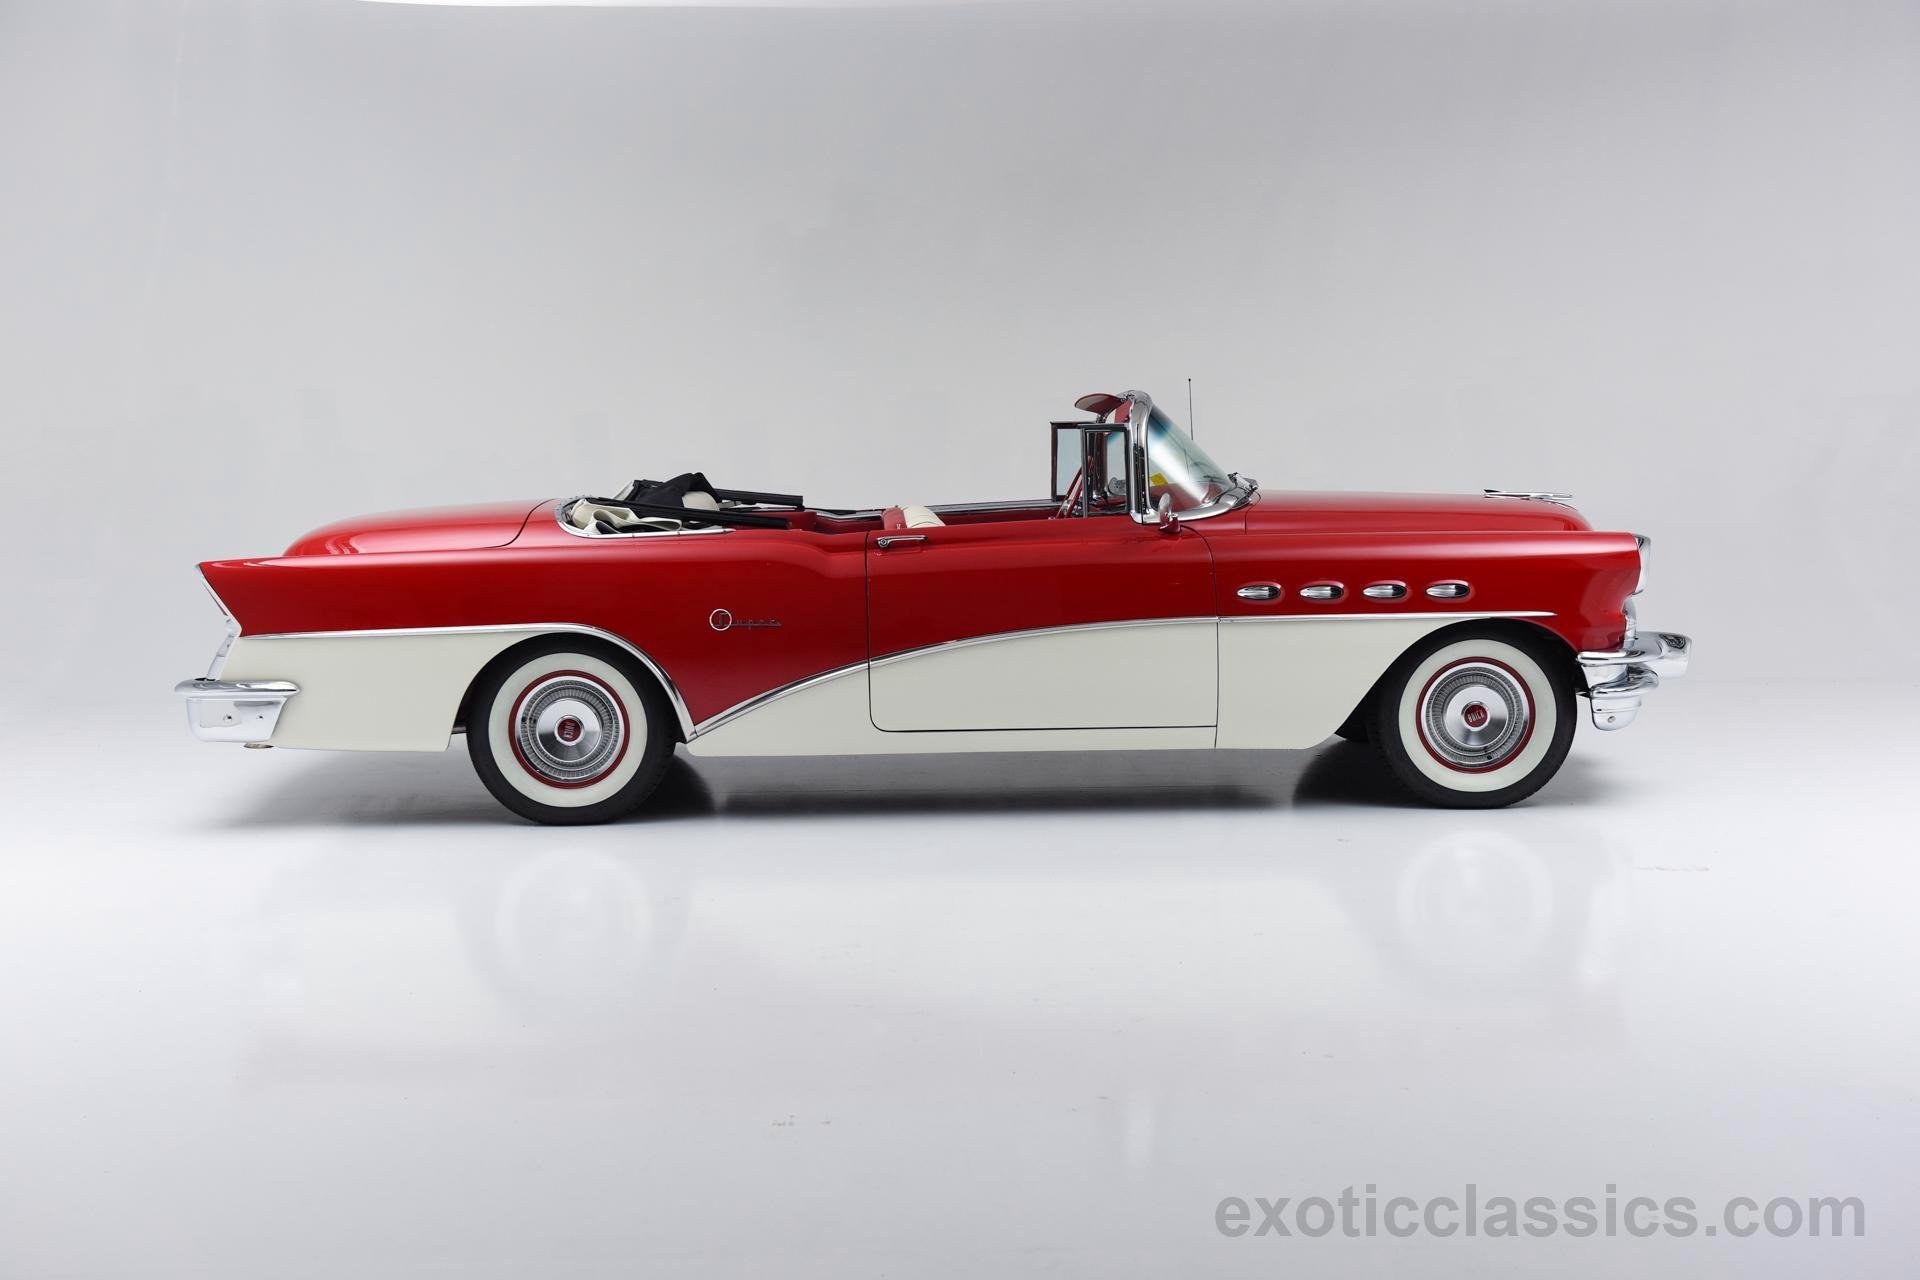 1956, Buick, Super, Convertible, Classic, Cars, Red, White Wallpaper